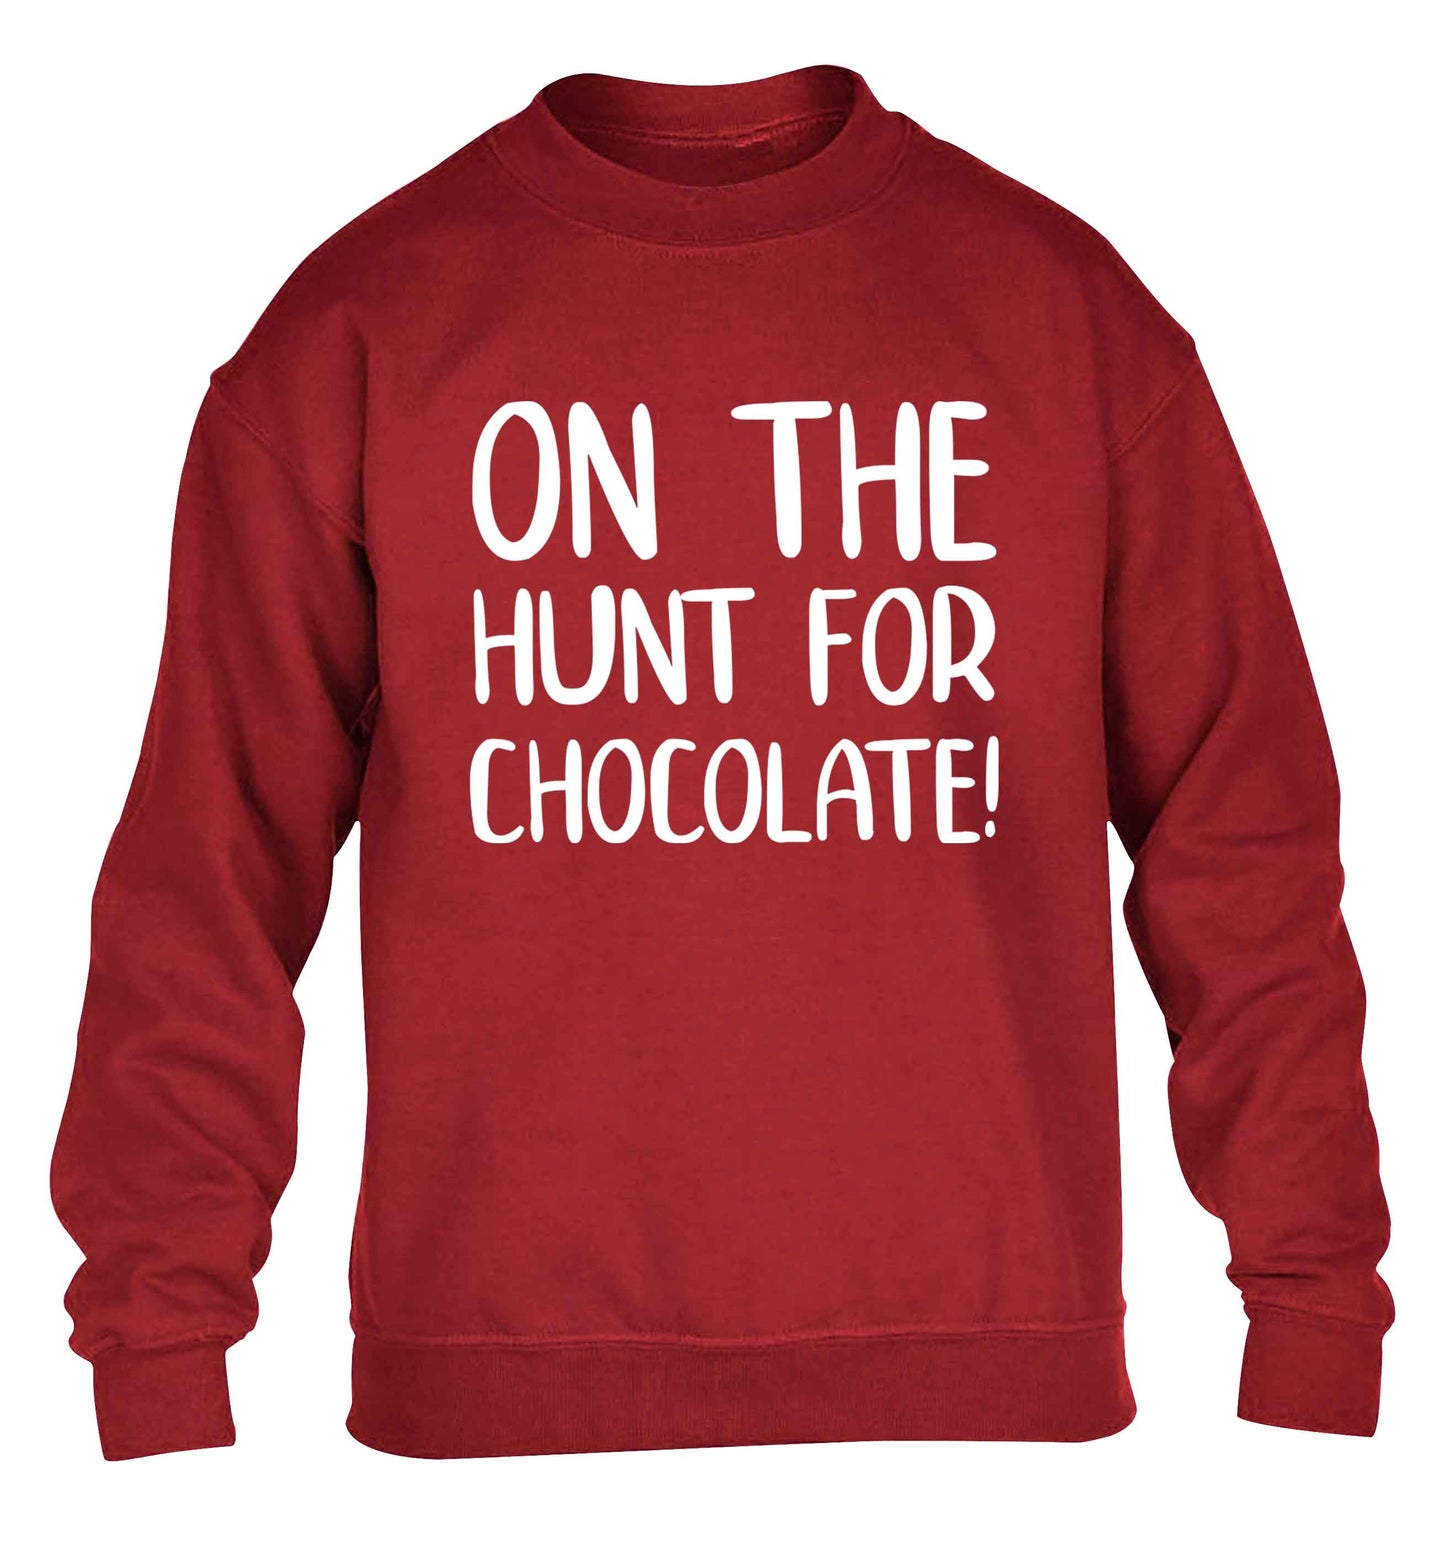 On the hunt for chocolate! children's grey sweater 12-13 Years